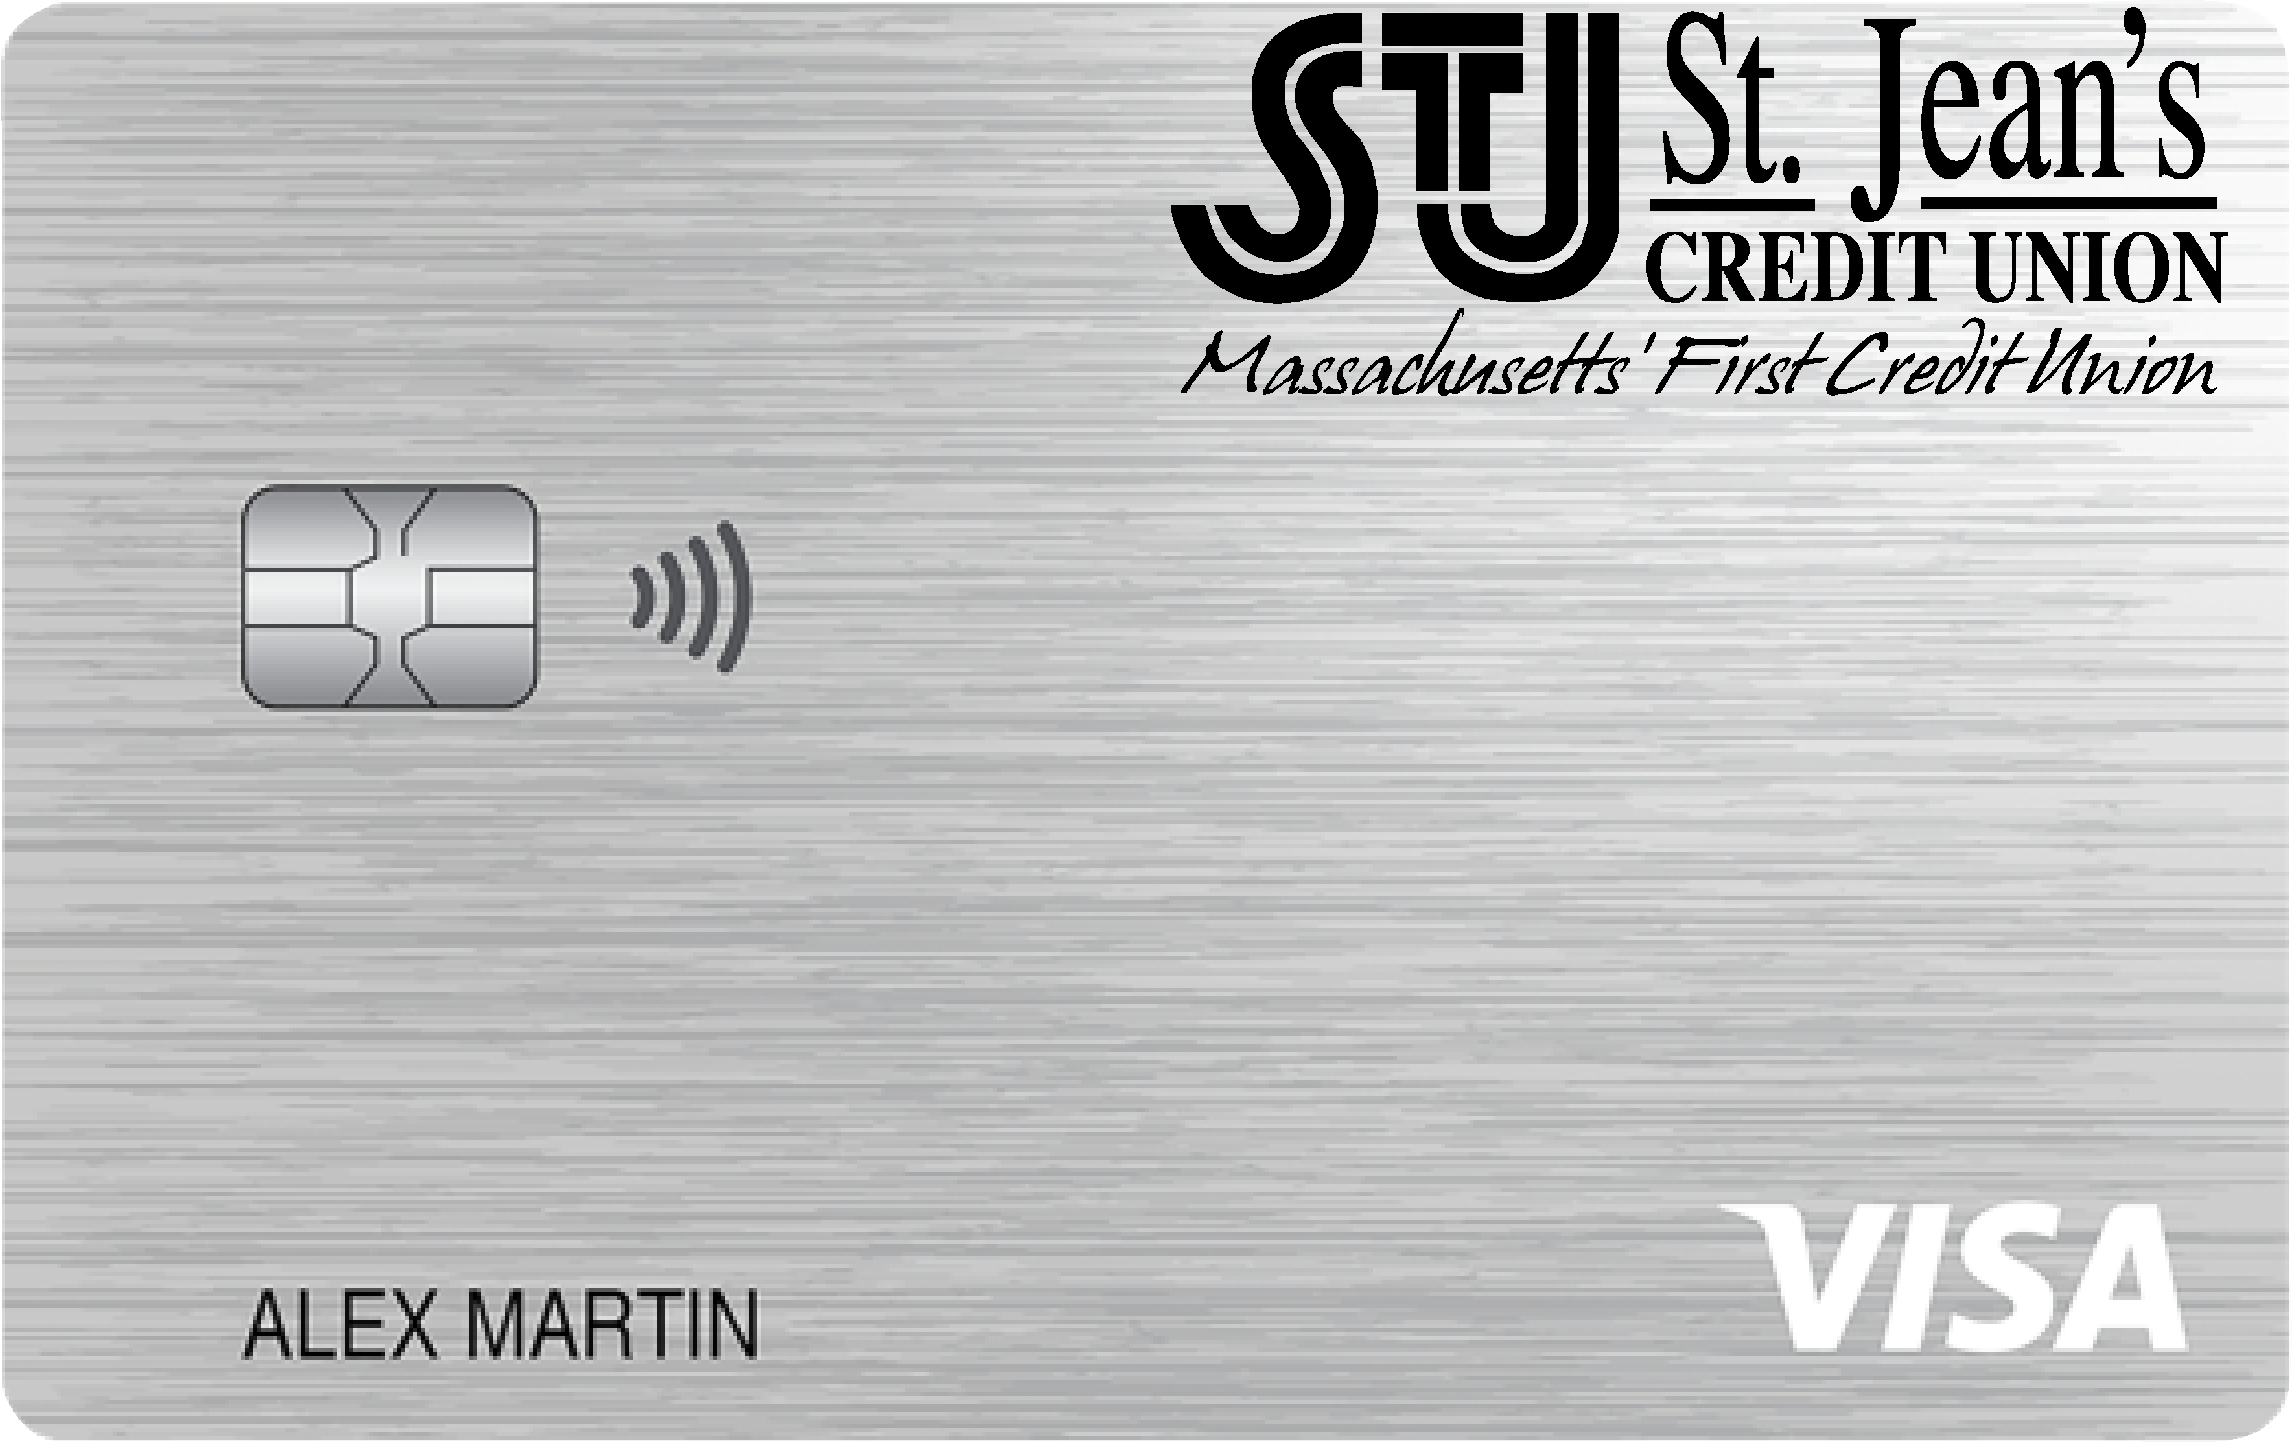 St. Jean's Credit Union Secured Card